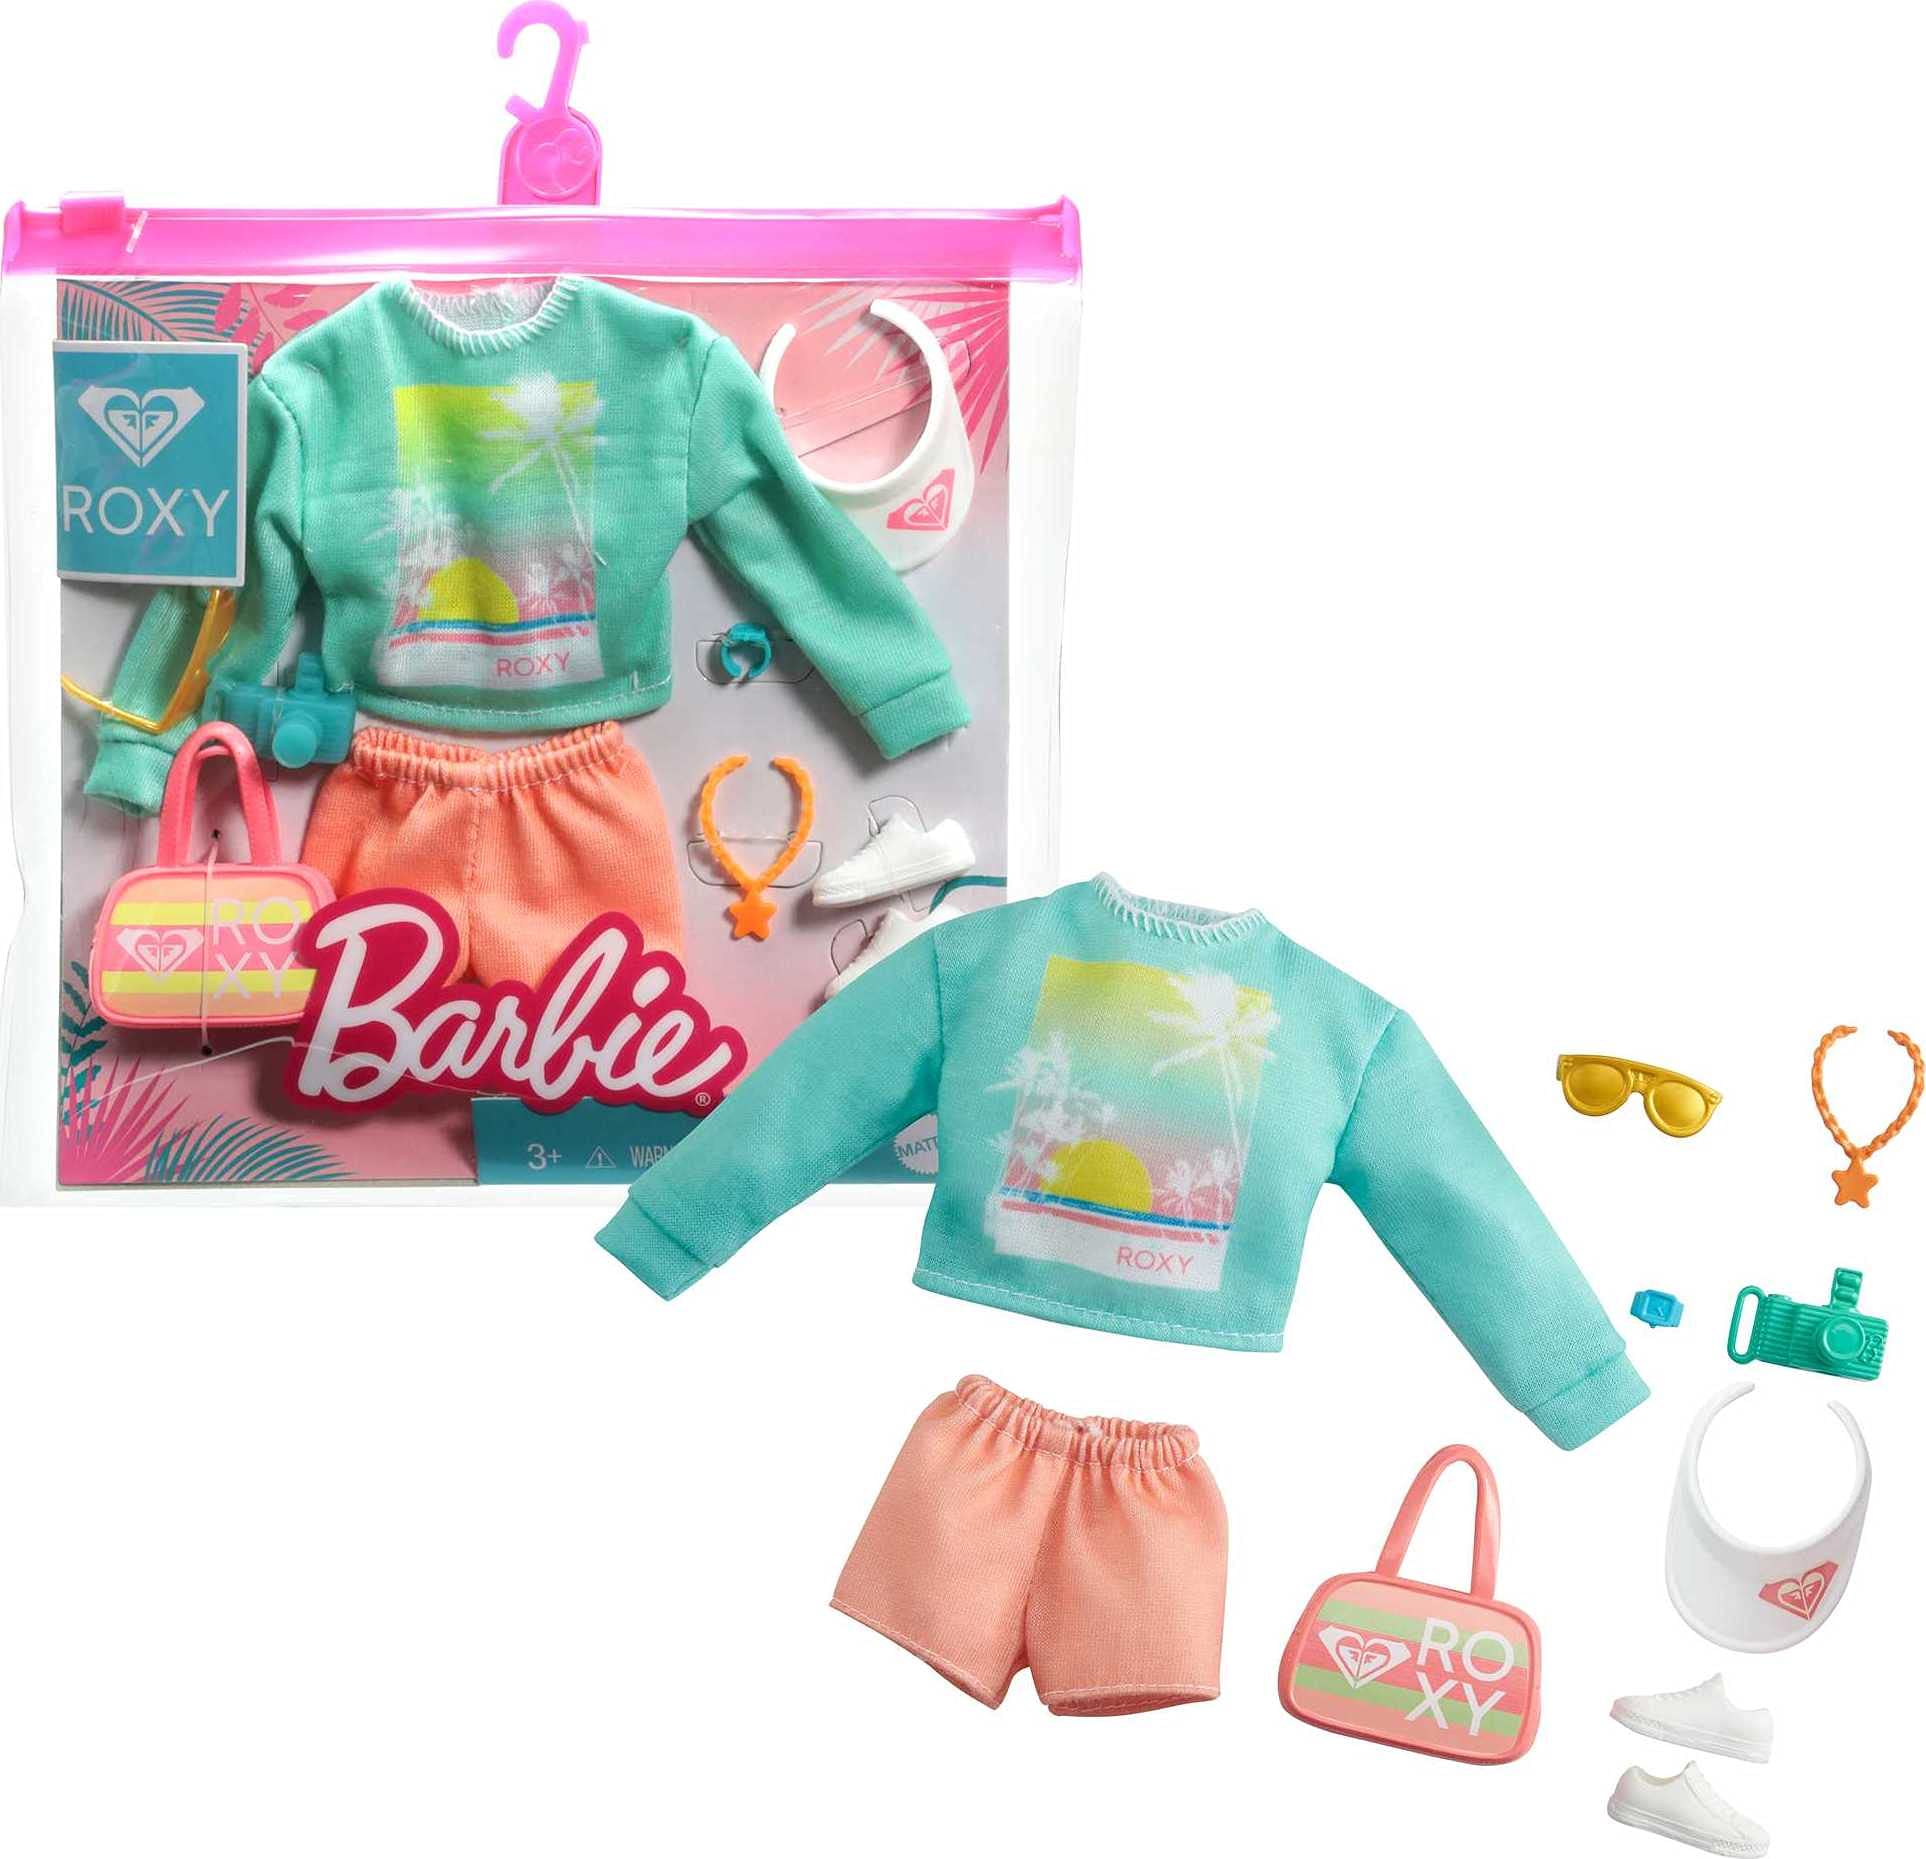 Mua Barbie Storytelling Fashion Pack of Doll Clothes Inspired by Roxy:  Sweatshirt with Roxy Graphic, Orange Shorts & 7 Beach-Themed Accessories  Dolls Including Camera, Gift for 3 to 8 Year Old trên